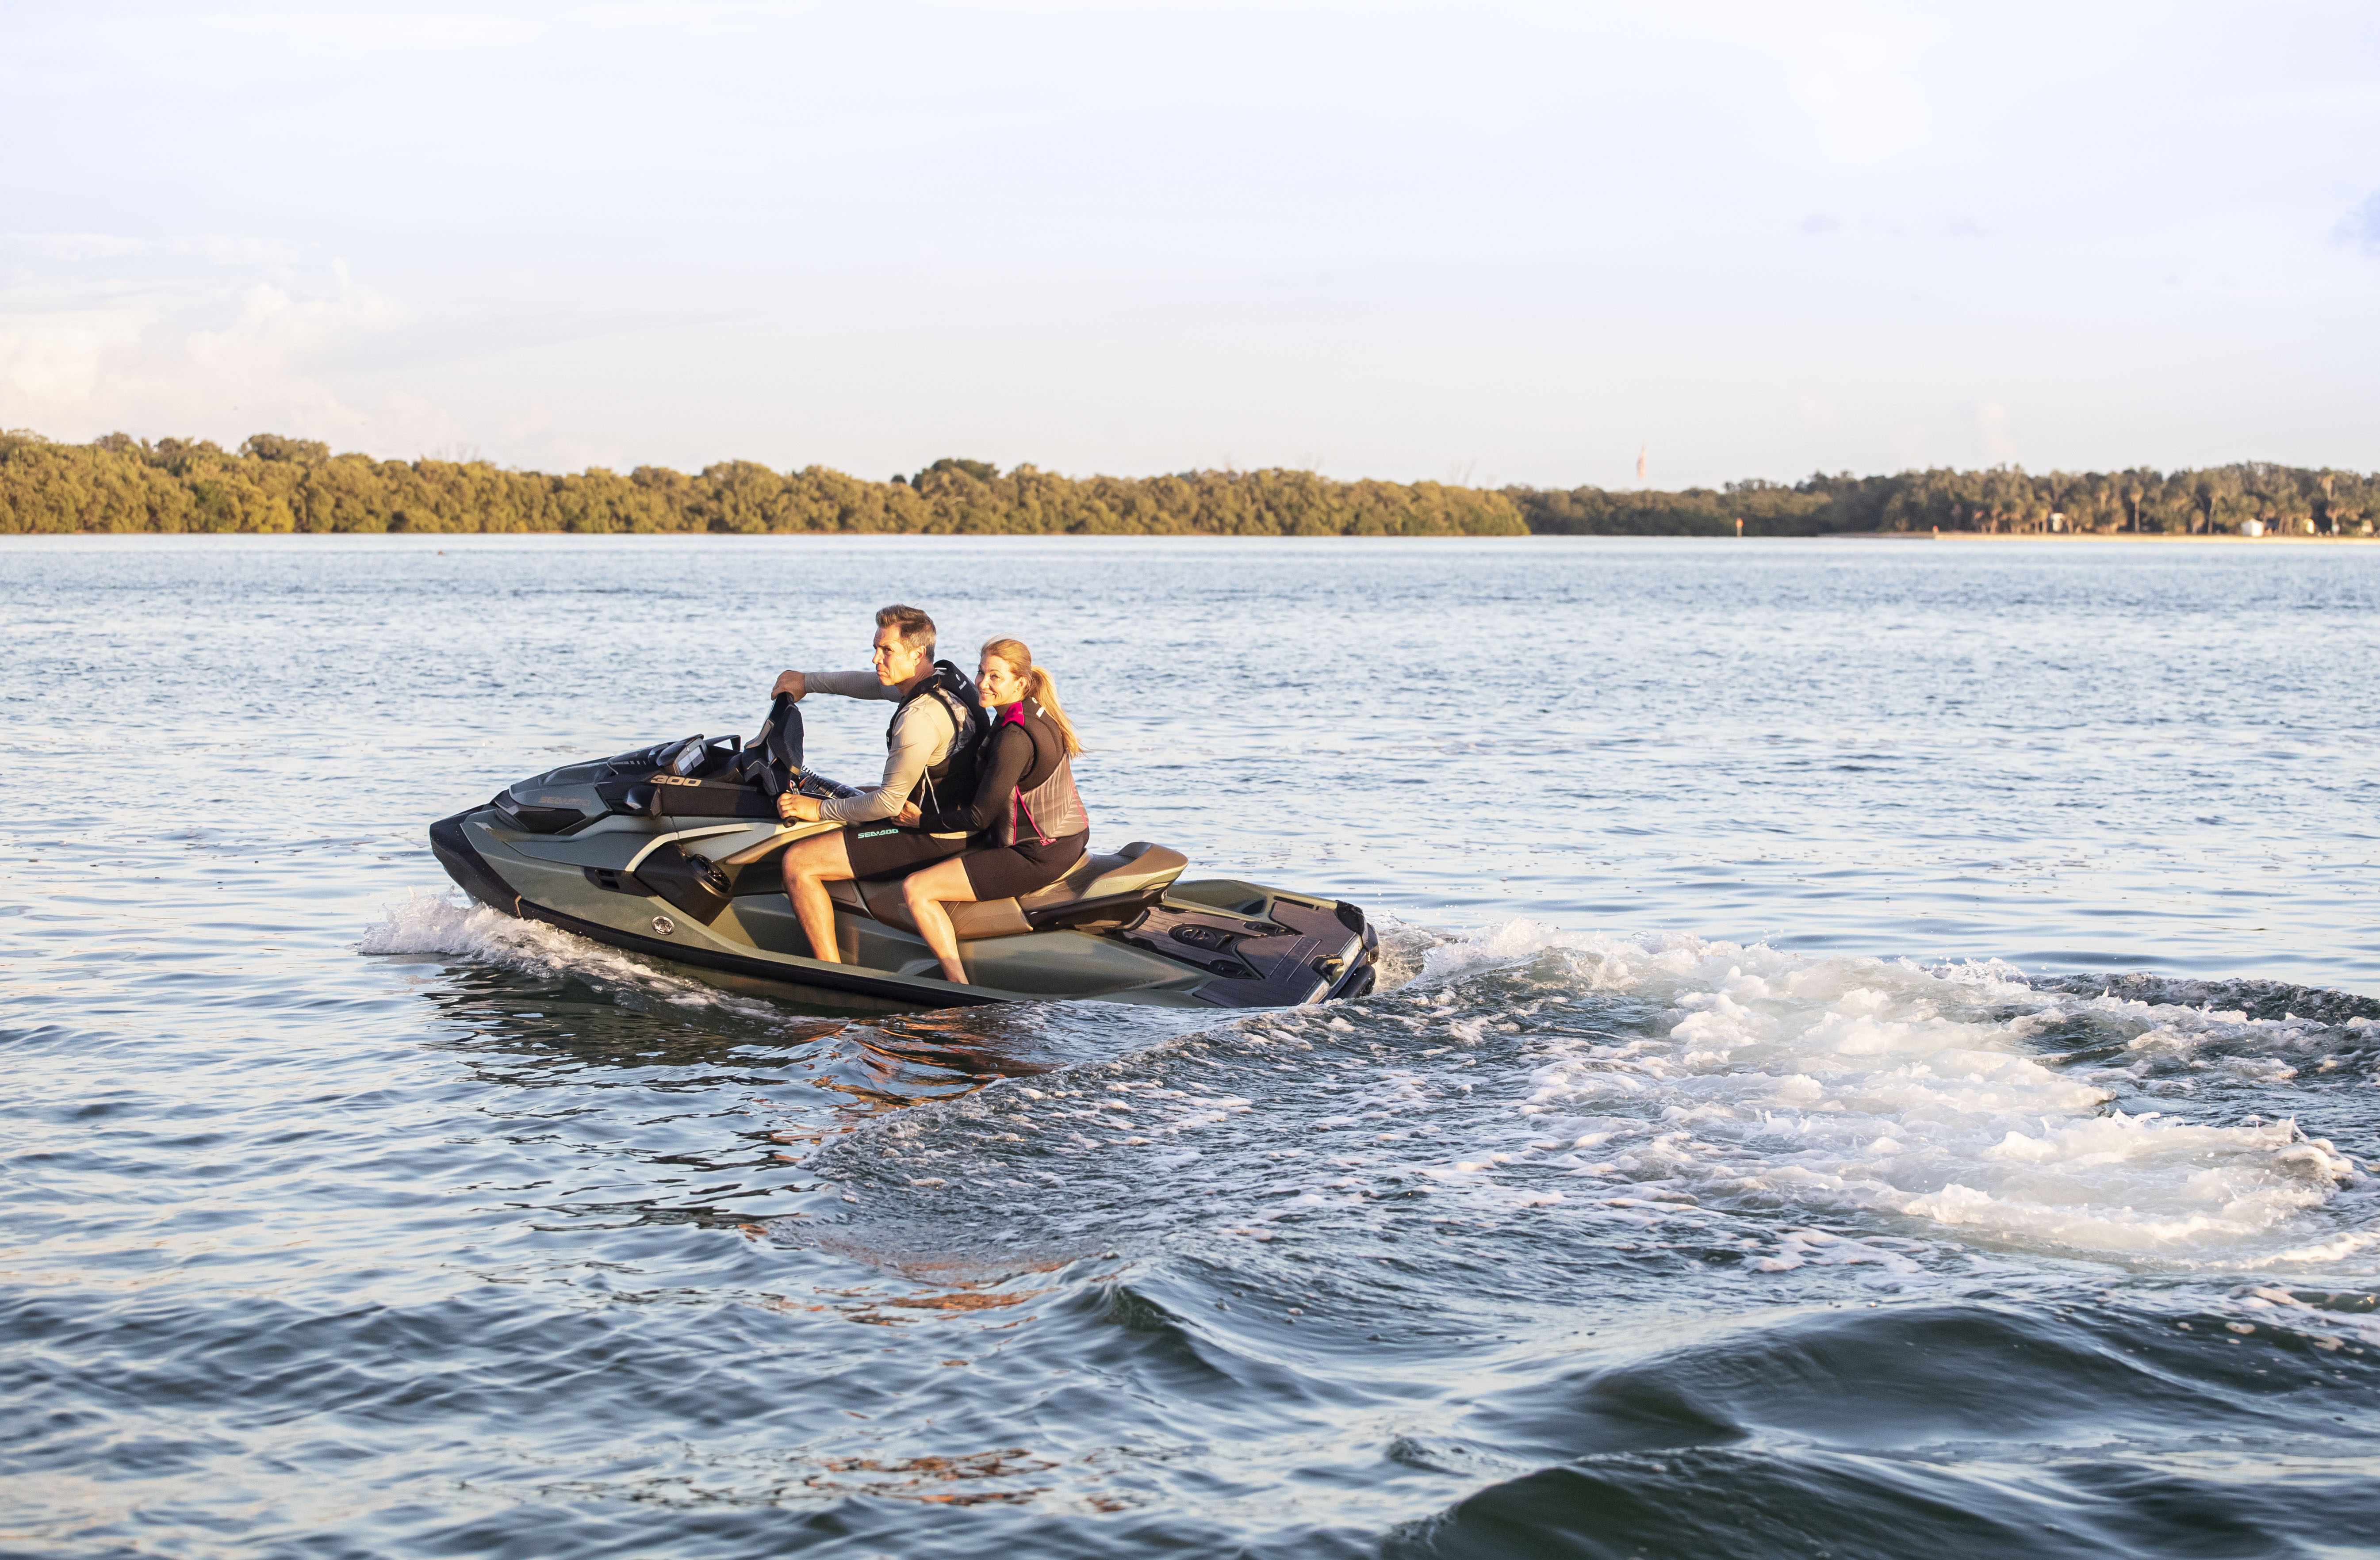 GET YOUR SEA-DOO READY FOR THE COOLER SEASONS!